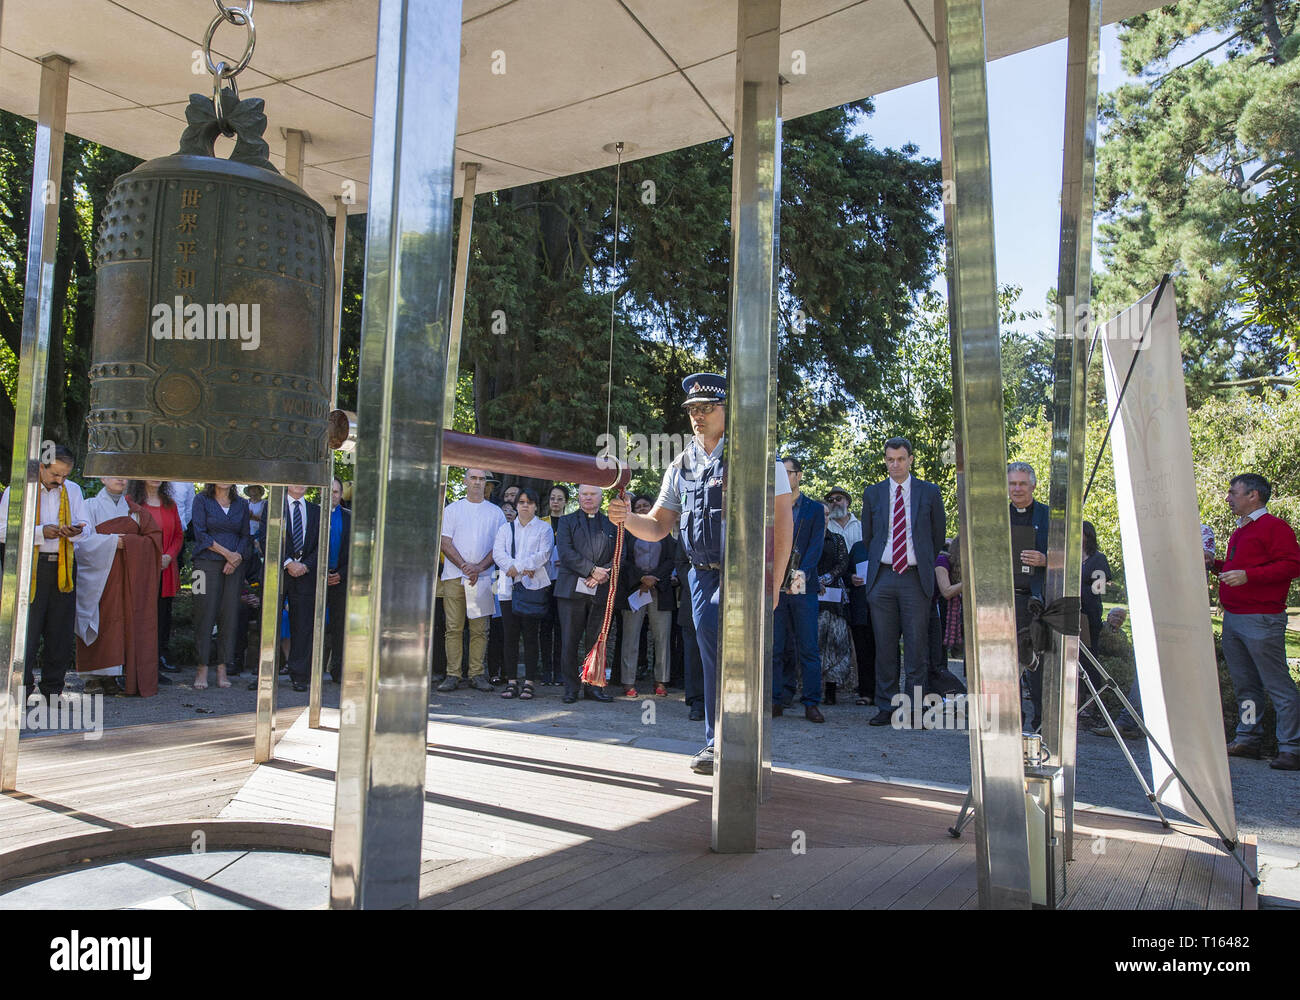 Christchurch, Canterbury, New Zealand. 24th Mar, 2019. A police officer sounds the Peace Bell in the Botanic Gardens during an interfaith service. Some 24 different faiths were represented at the service, with the Peace Bell sounding 50 times in memory of those killed at the Al Noor and Linwood mosques on 15 March. Credit: PJ Heller/ZUMA Wire/Alamy Live News Stock Photo